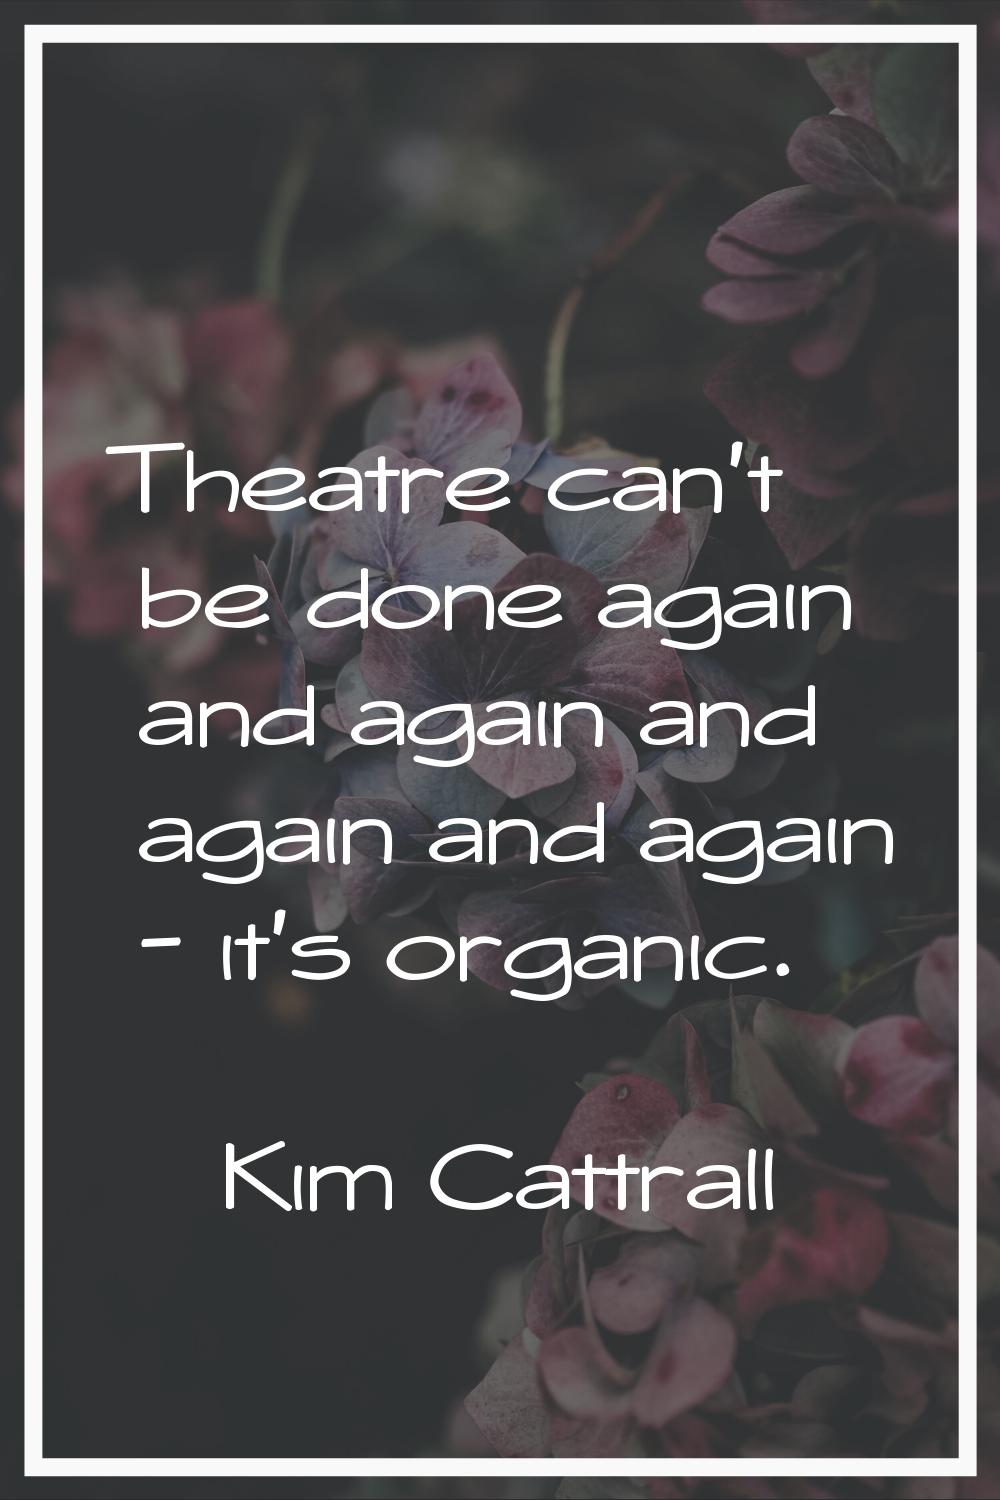 Theatre can't be done again and again and again and again - it's organic.